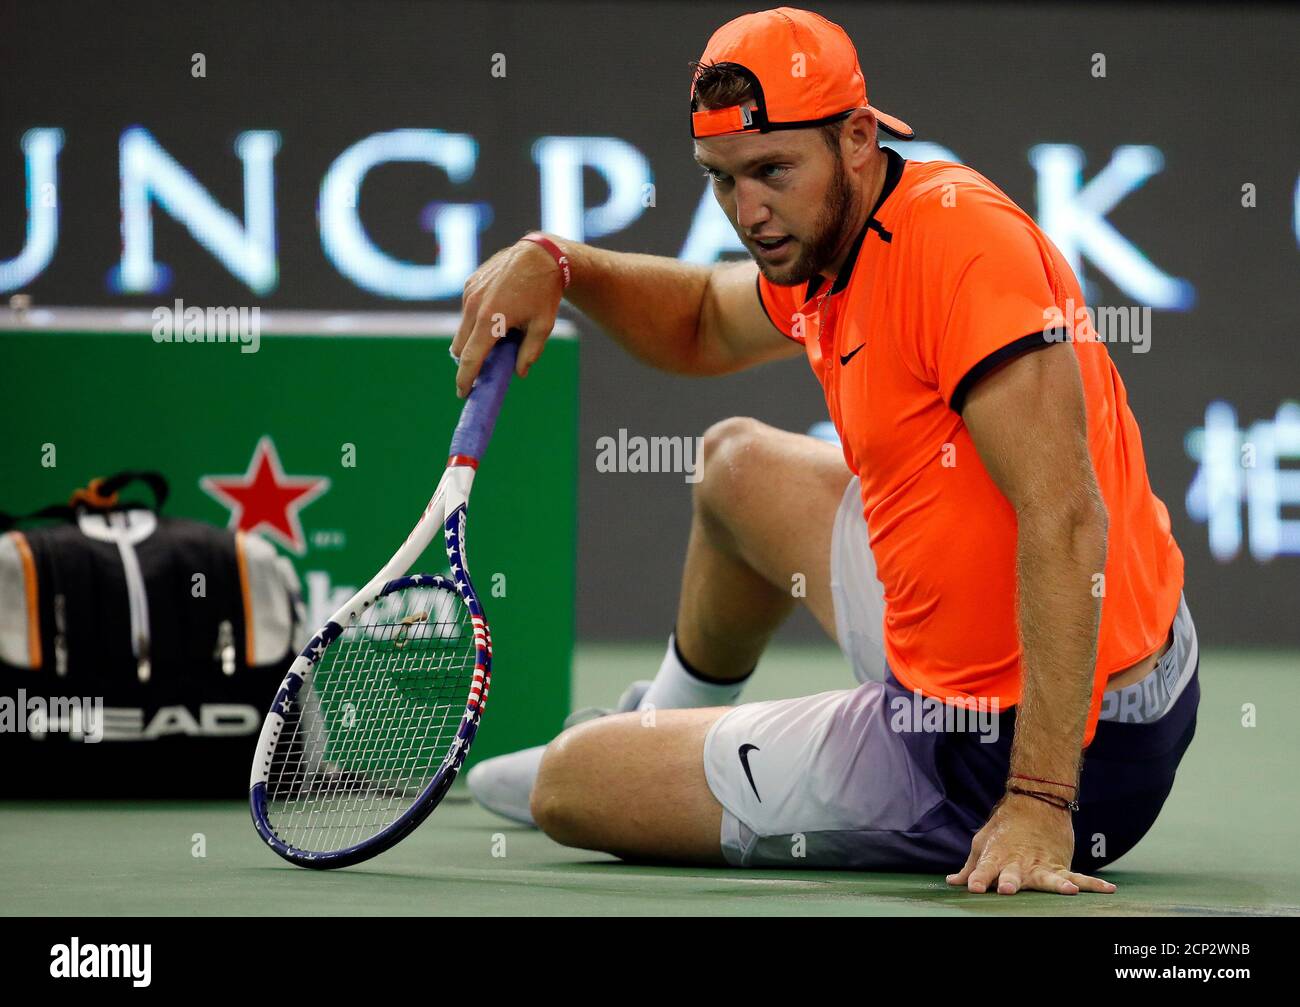 Tennis - Shanghai Masters tennis tournament - Shanghai, China - 14/10/16.  Jack Sock of U.S. falls during his match against Gilles Simon of France.  REUTERS/Aly Song Stock Photo - Alamy